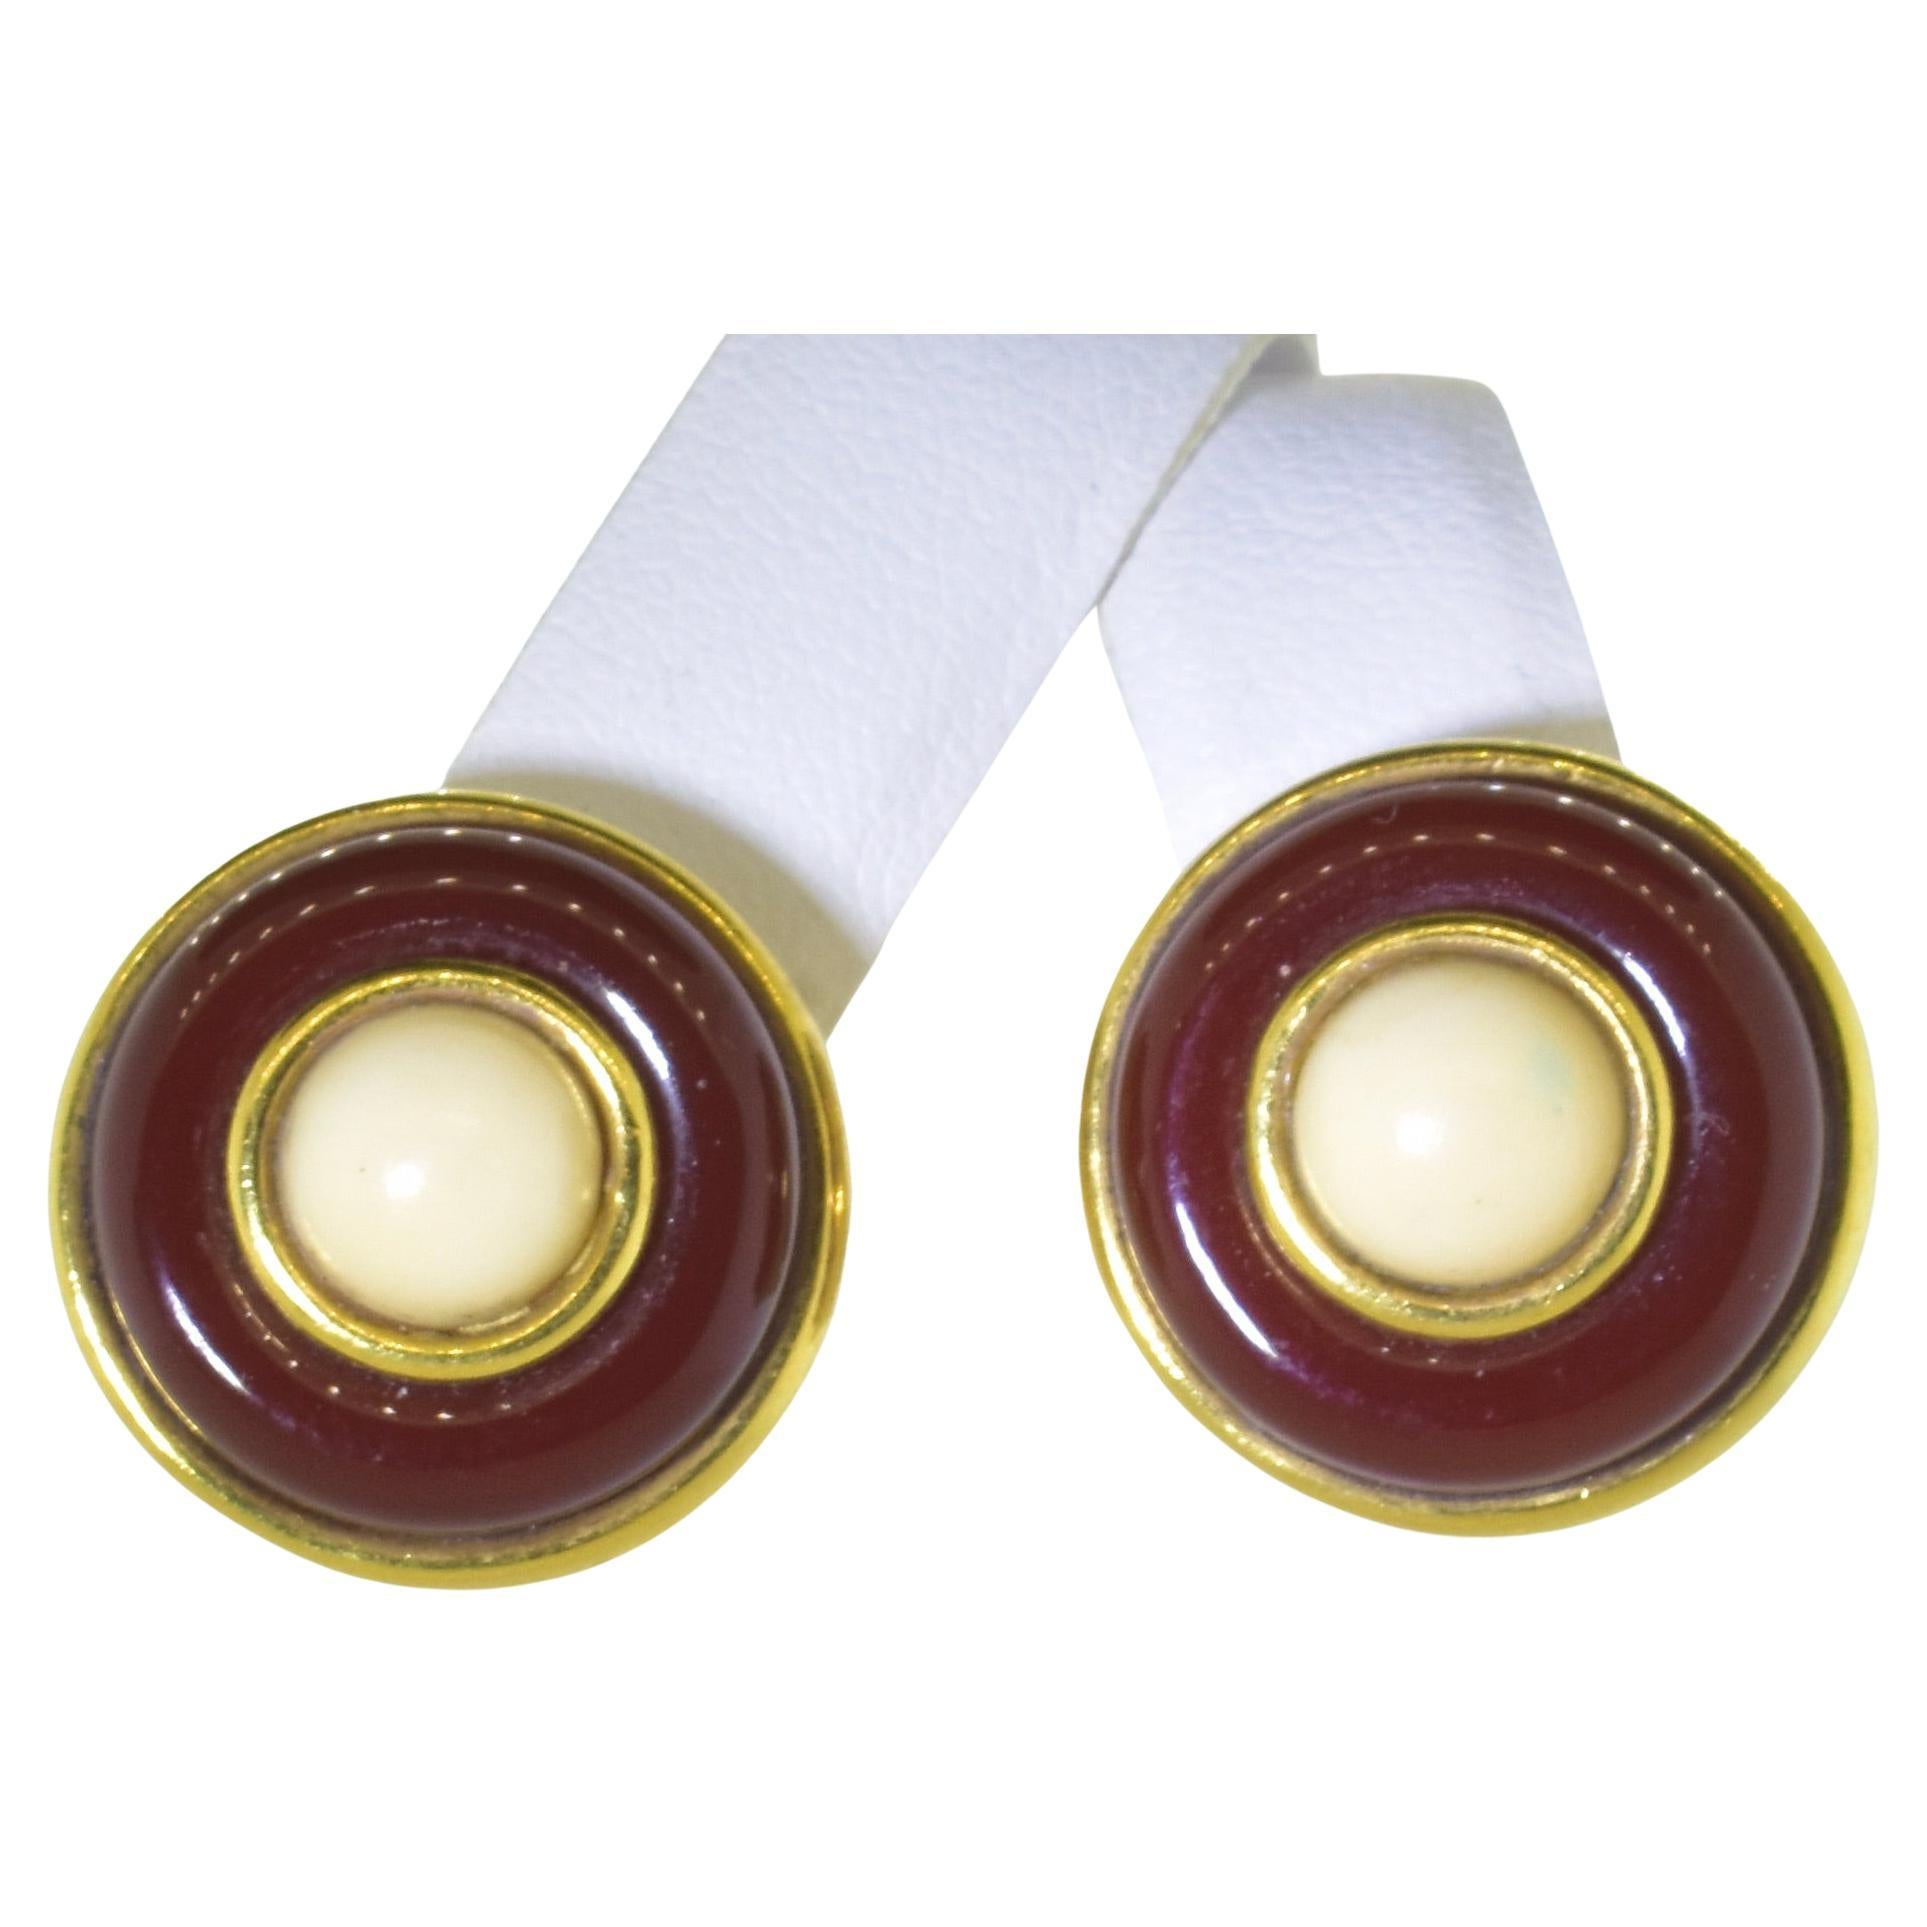 Tiffany & Co., designed by Donald Claflin, an important designer for Tiffany, vintage earrings in 18K, these vintage earrings are carnelian and white agate stones in a classic design.  They are signed on the verso Tiffany & Co. and 18K.  The